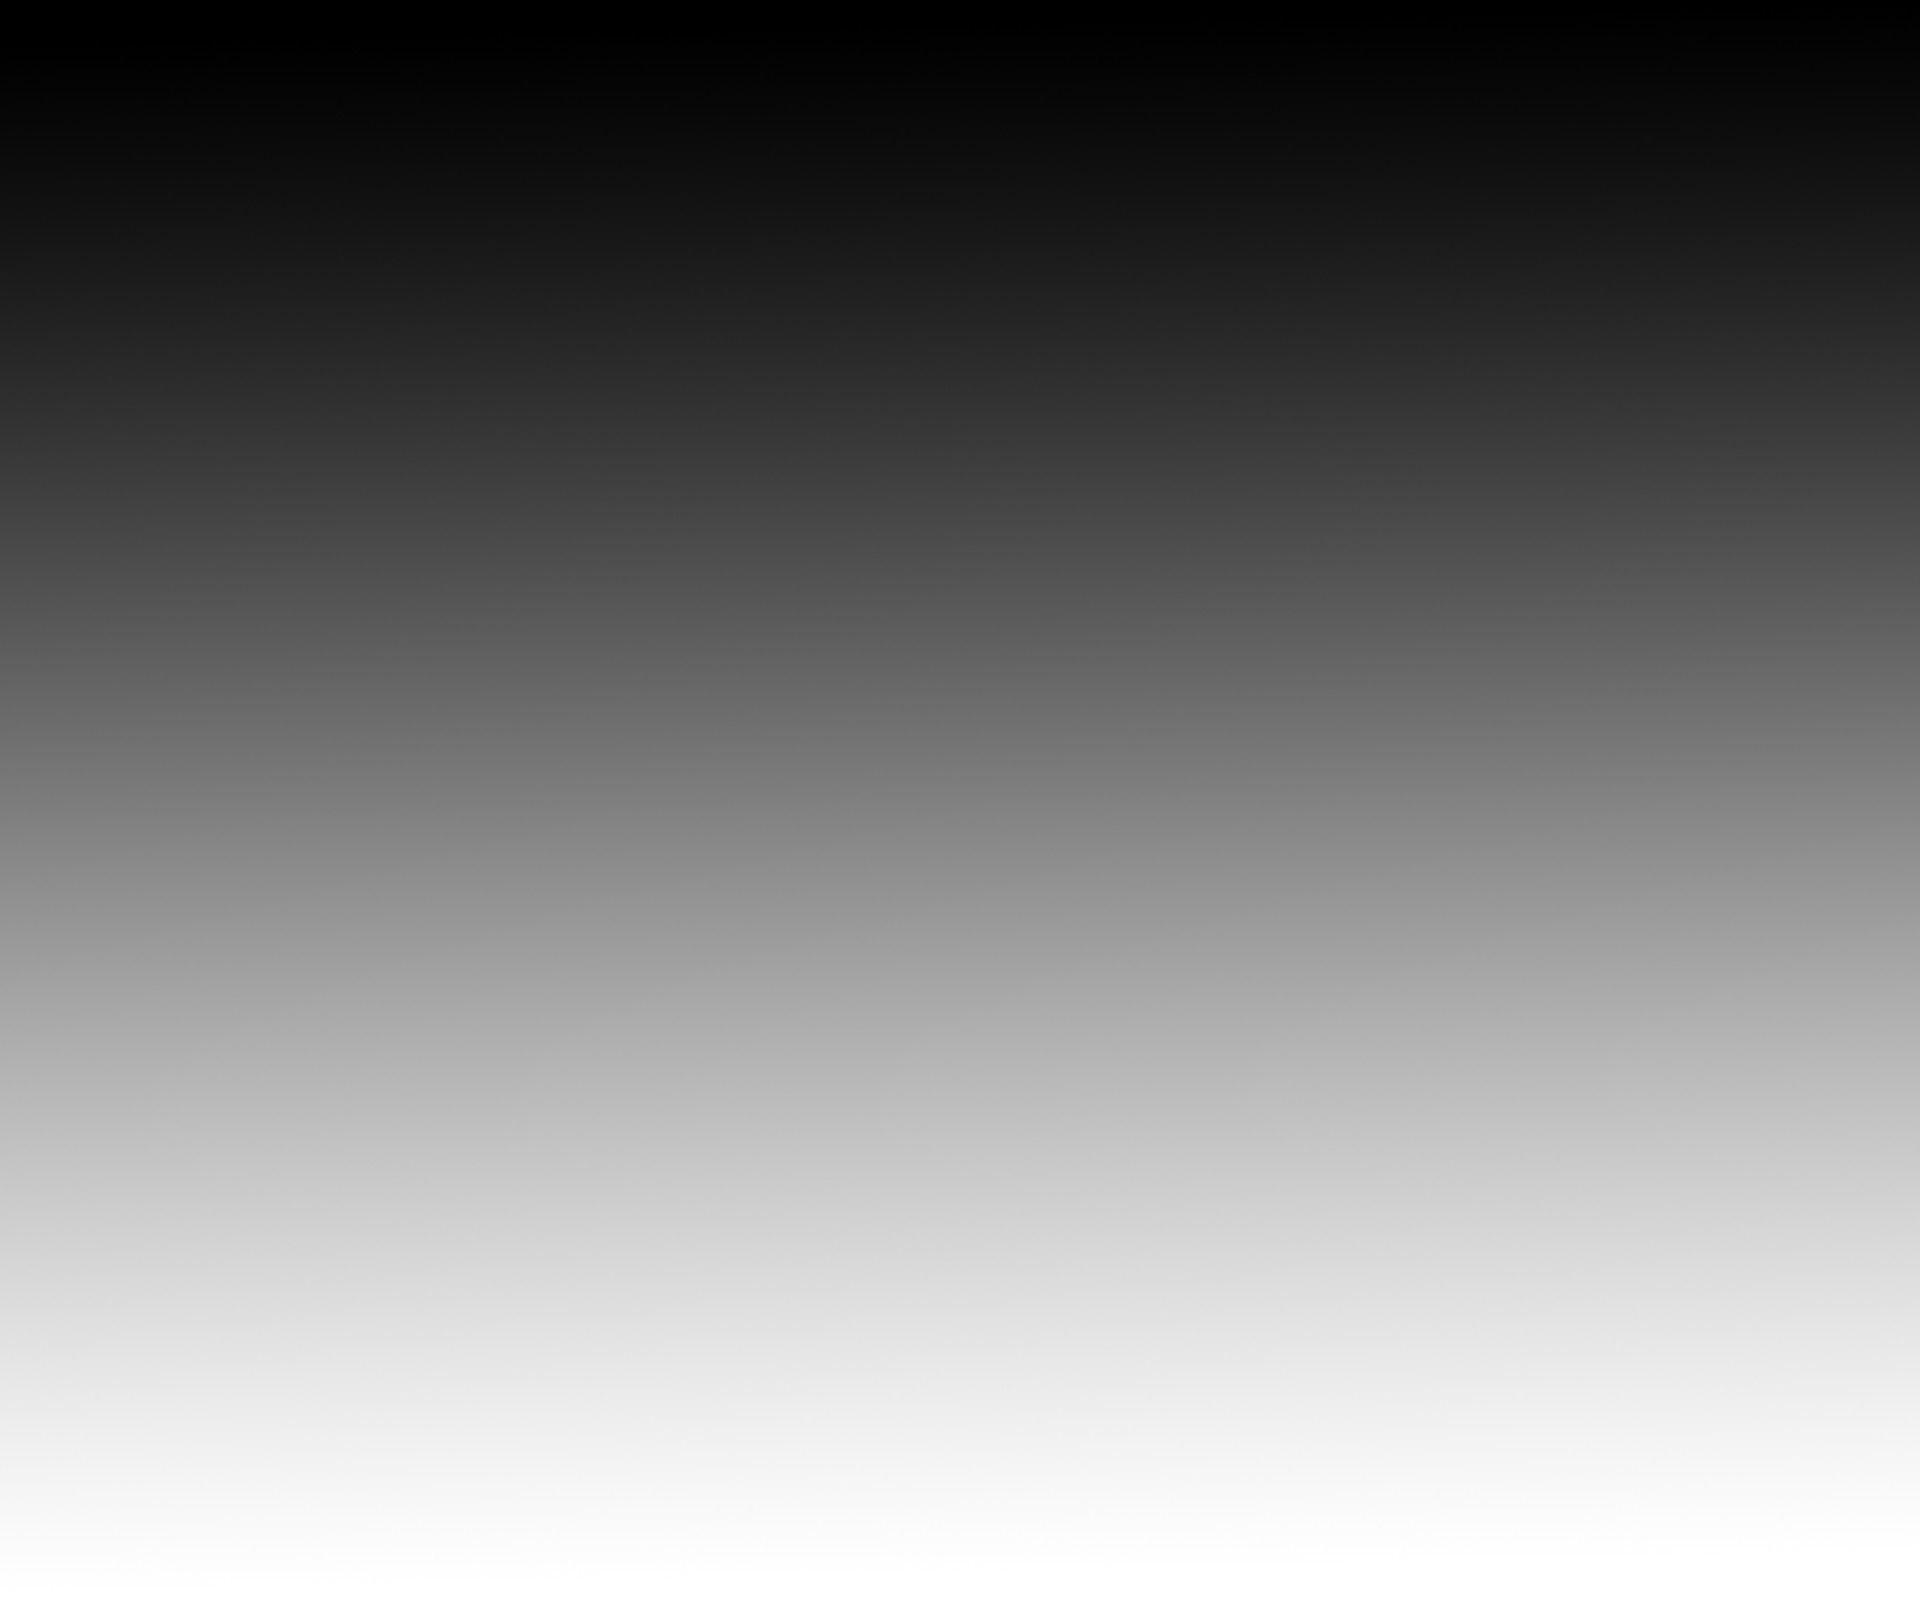 Black and White Gradient Wallpapers - Top Free Black and White Gradient ...